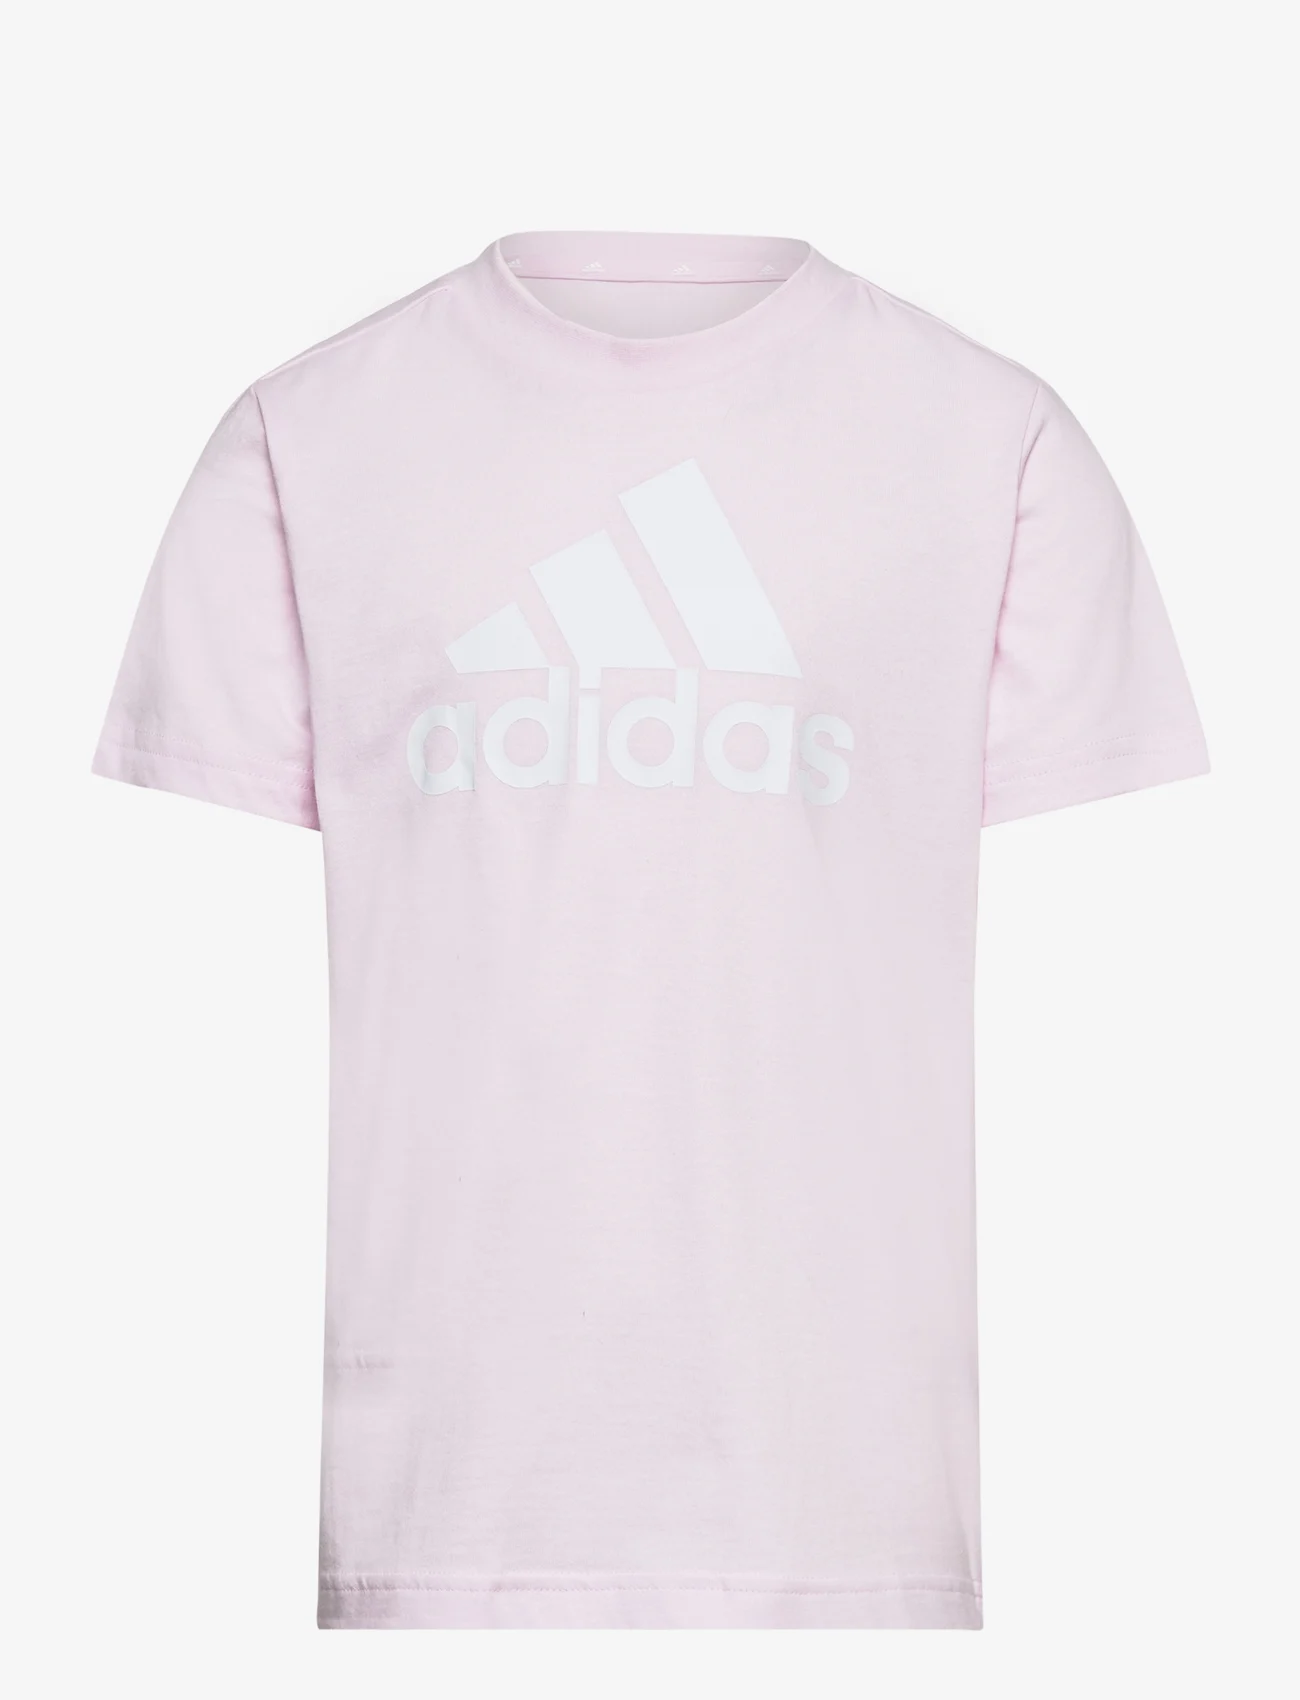 adidas Performance - LK BL CO TEE - short-sleeved t-shirts - clpink/white - 0